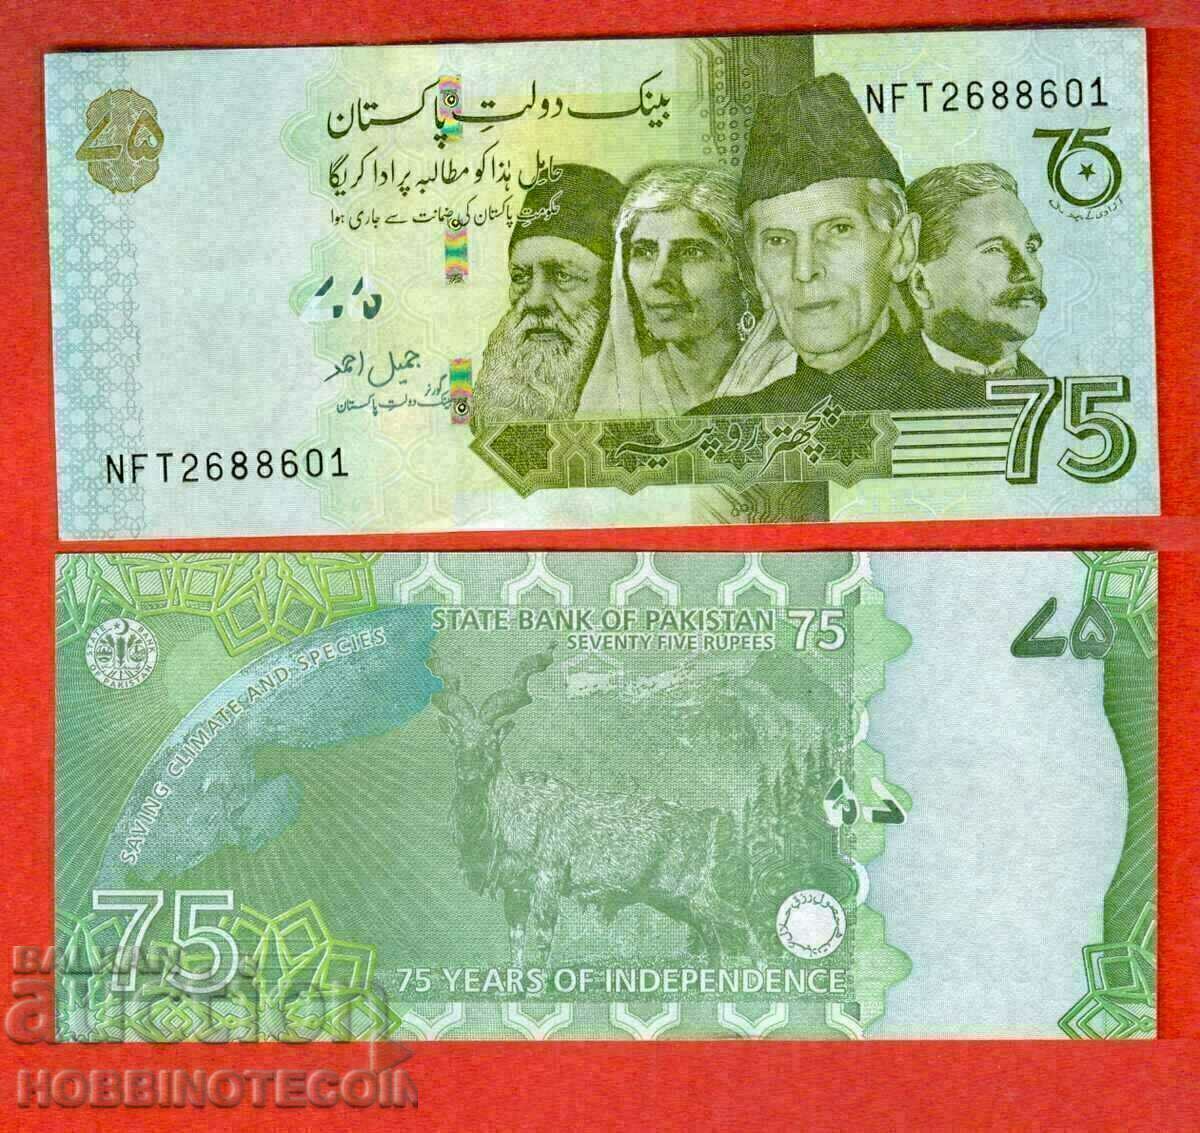 PAKISTAN PAKISTAN 75 Rupees issue issue 2022 NEW UNC